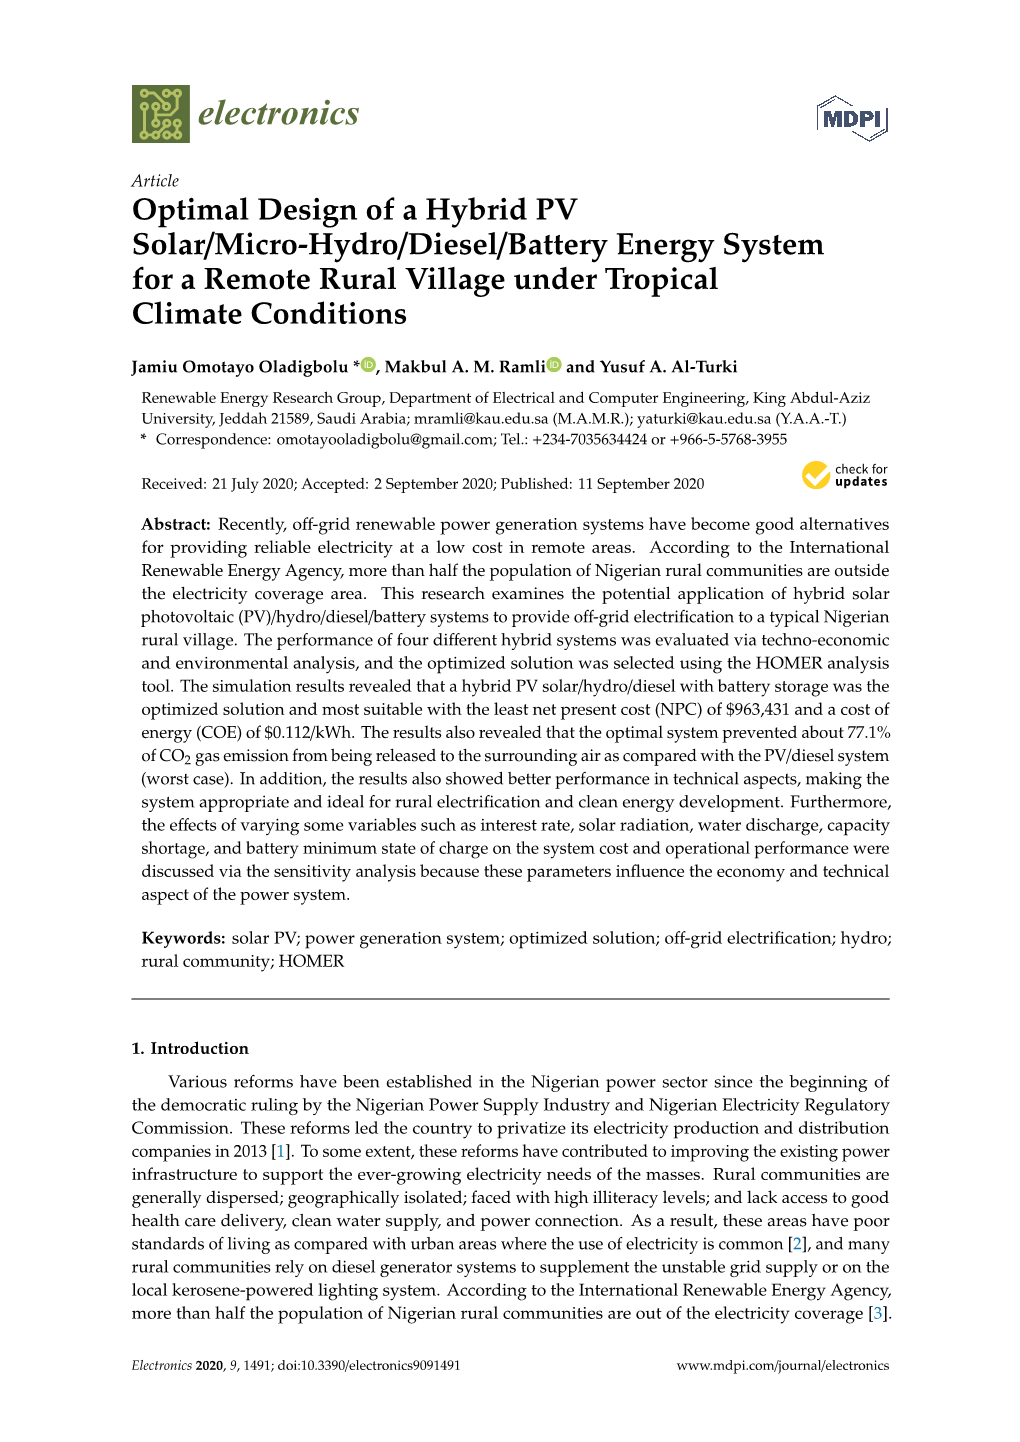 Optimal Design of a Hybrid PV Solar/Micro-Hydro/Diesel/Battery Energy System for a Remote Rural Village Under Tropical Climate Conditions